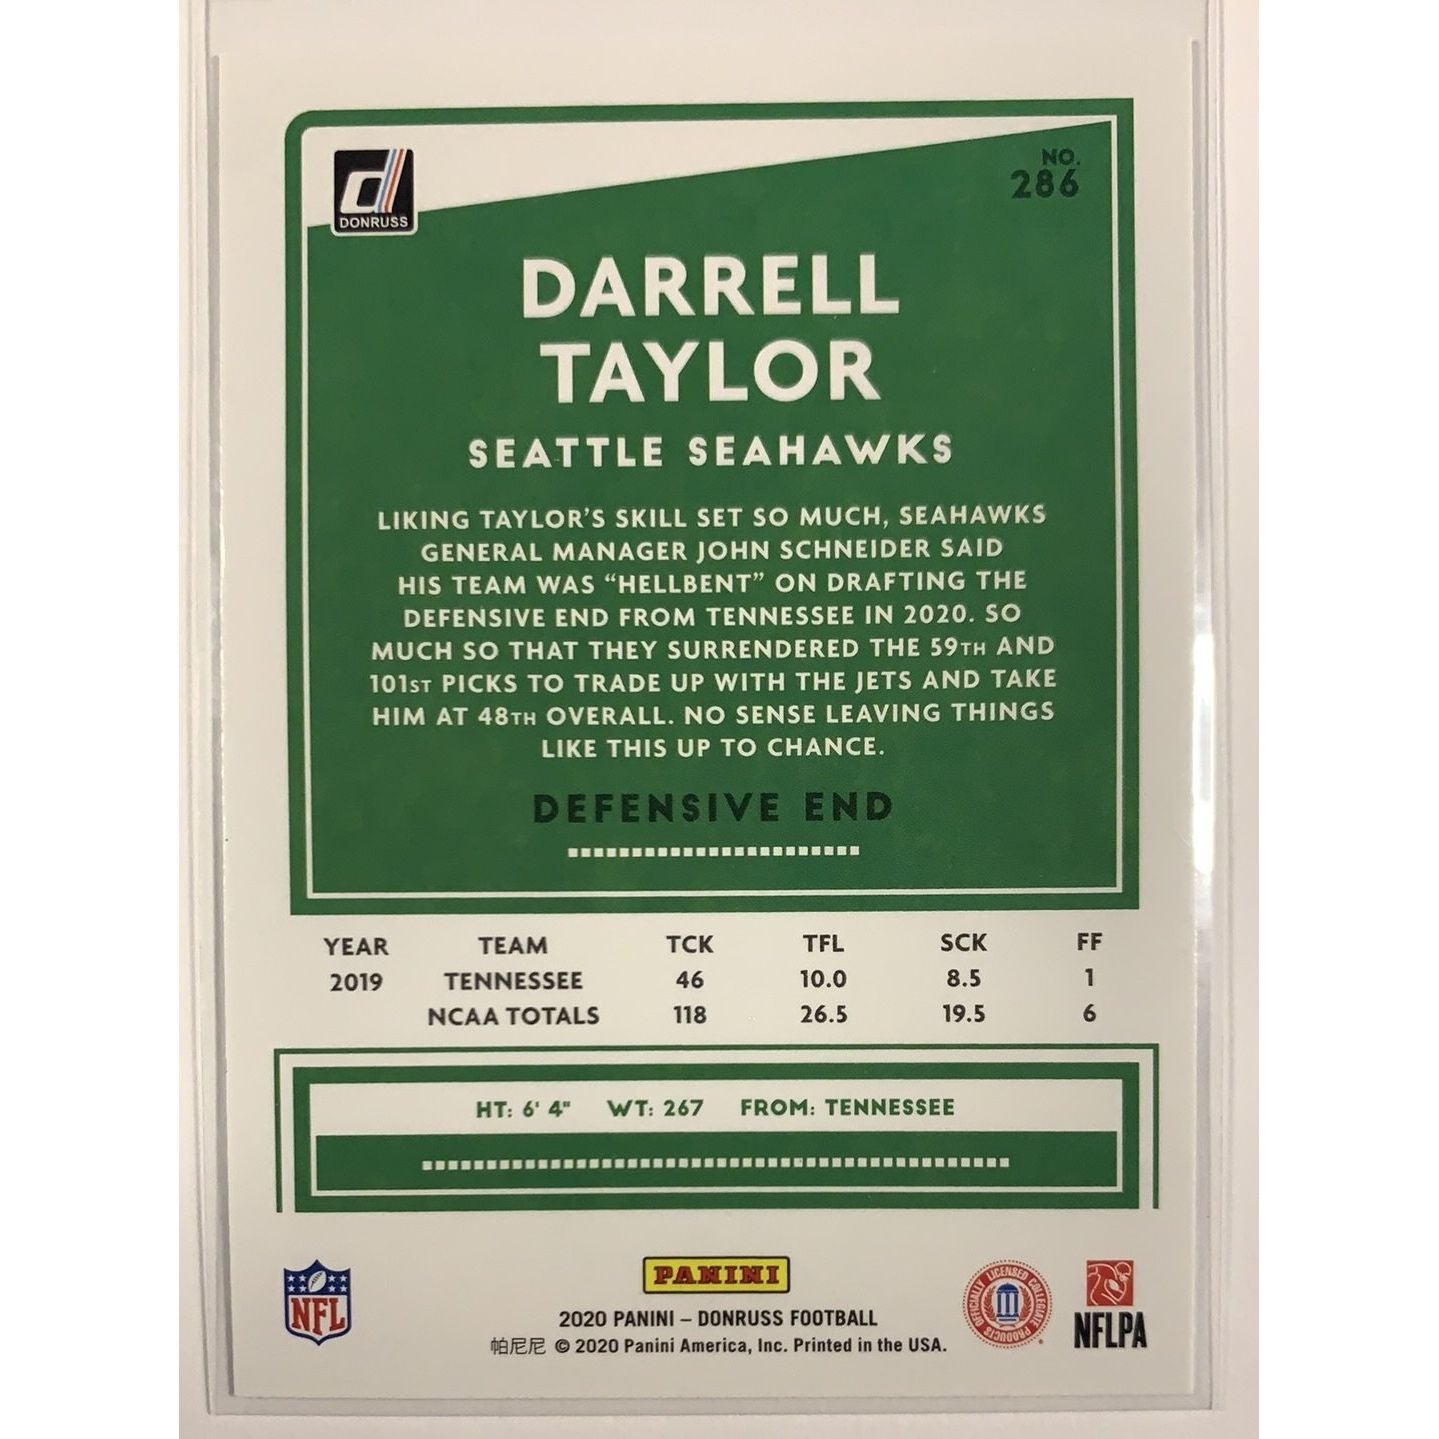  2020 Donruss Darrell Taylor RC  Local Legends Cards & Collectibles